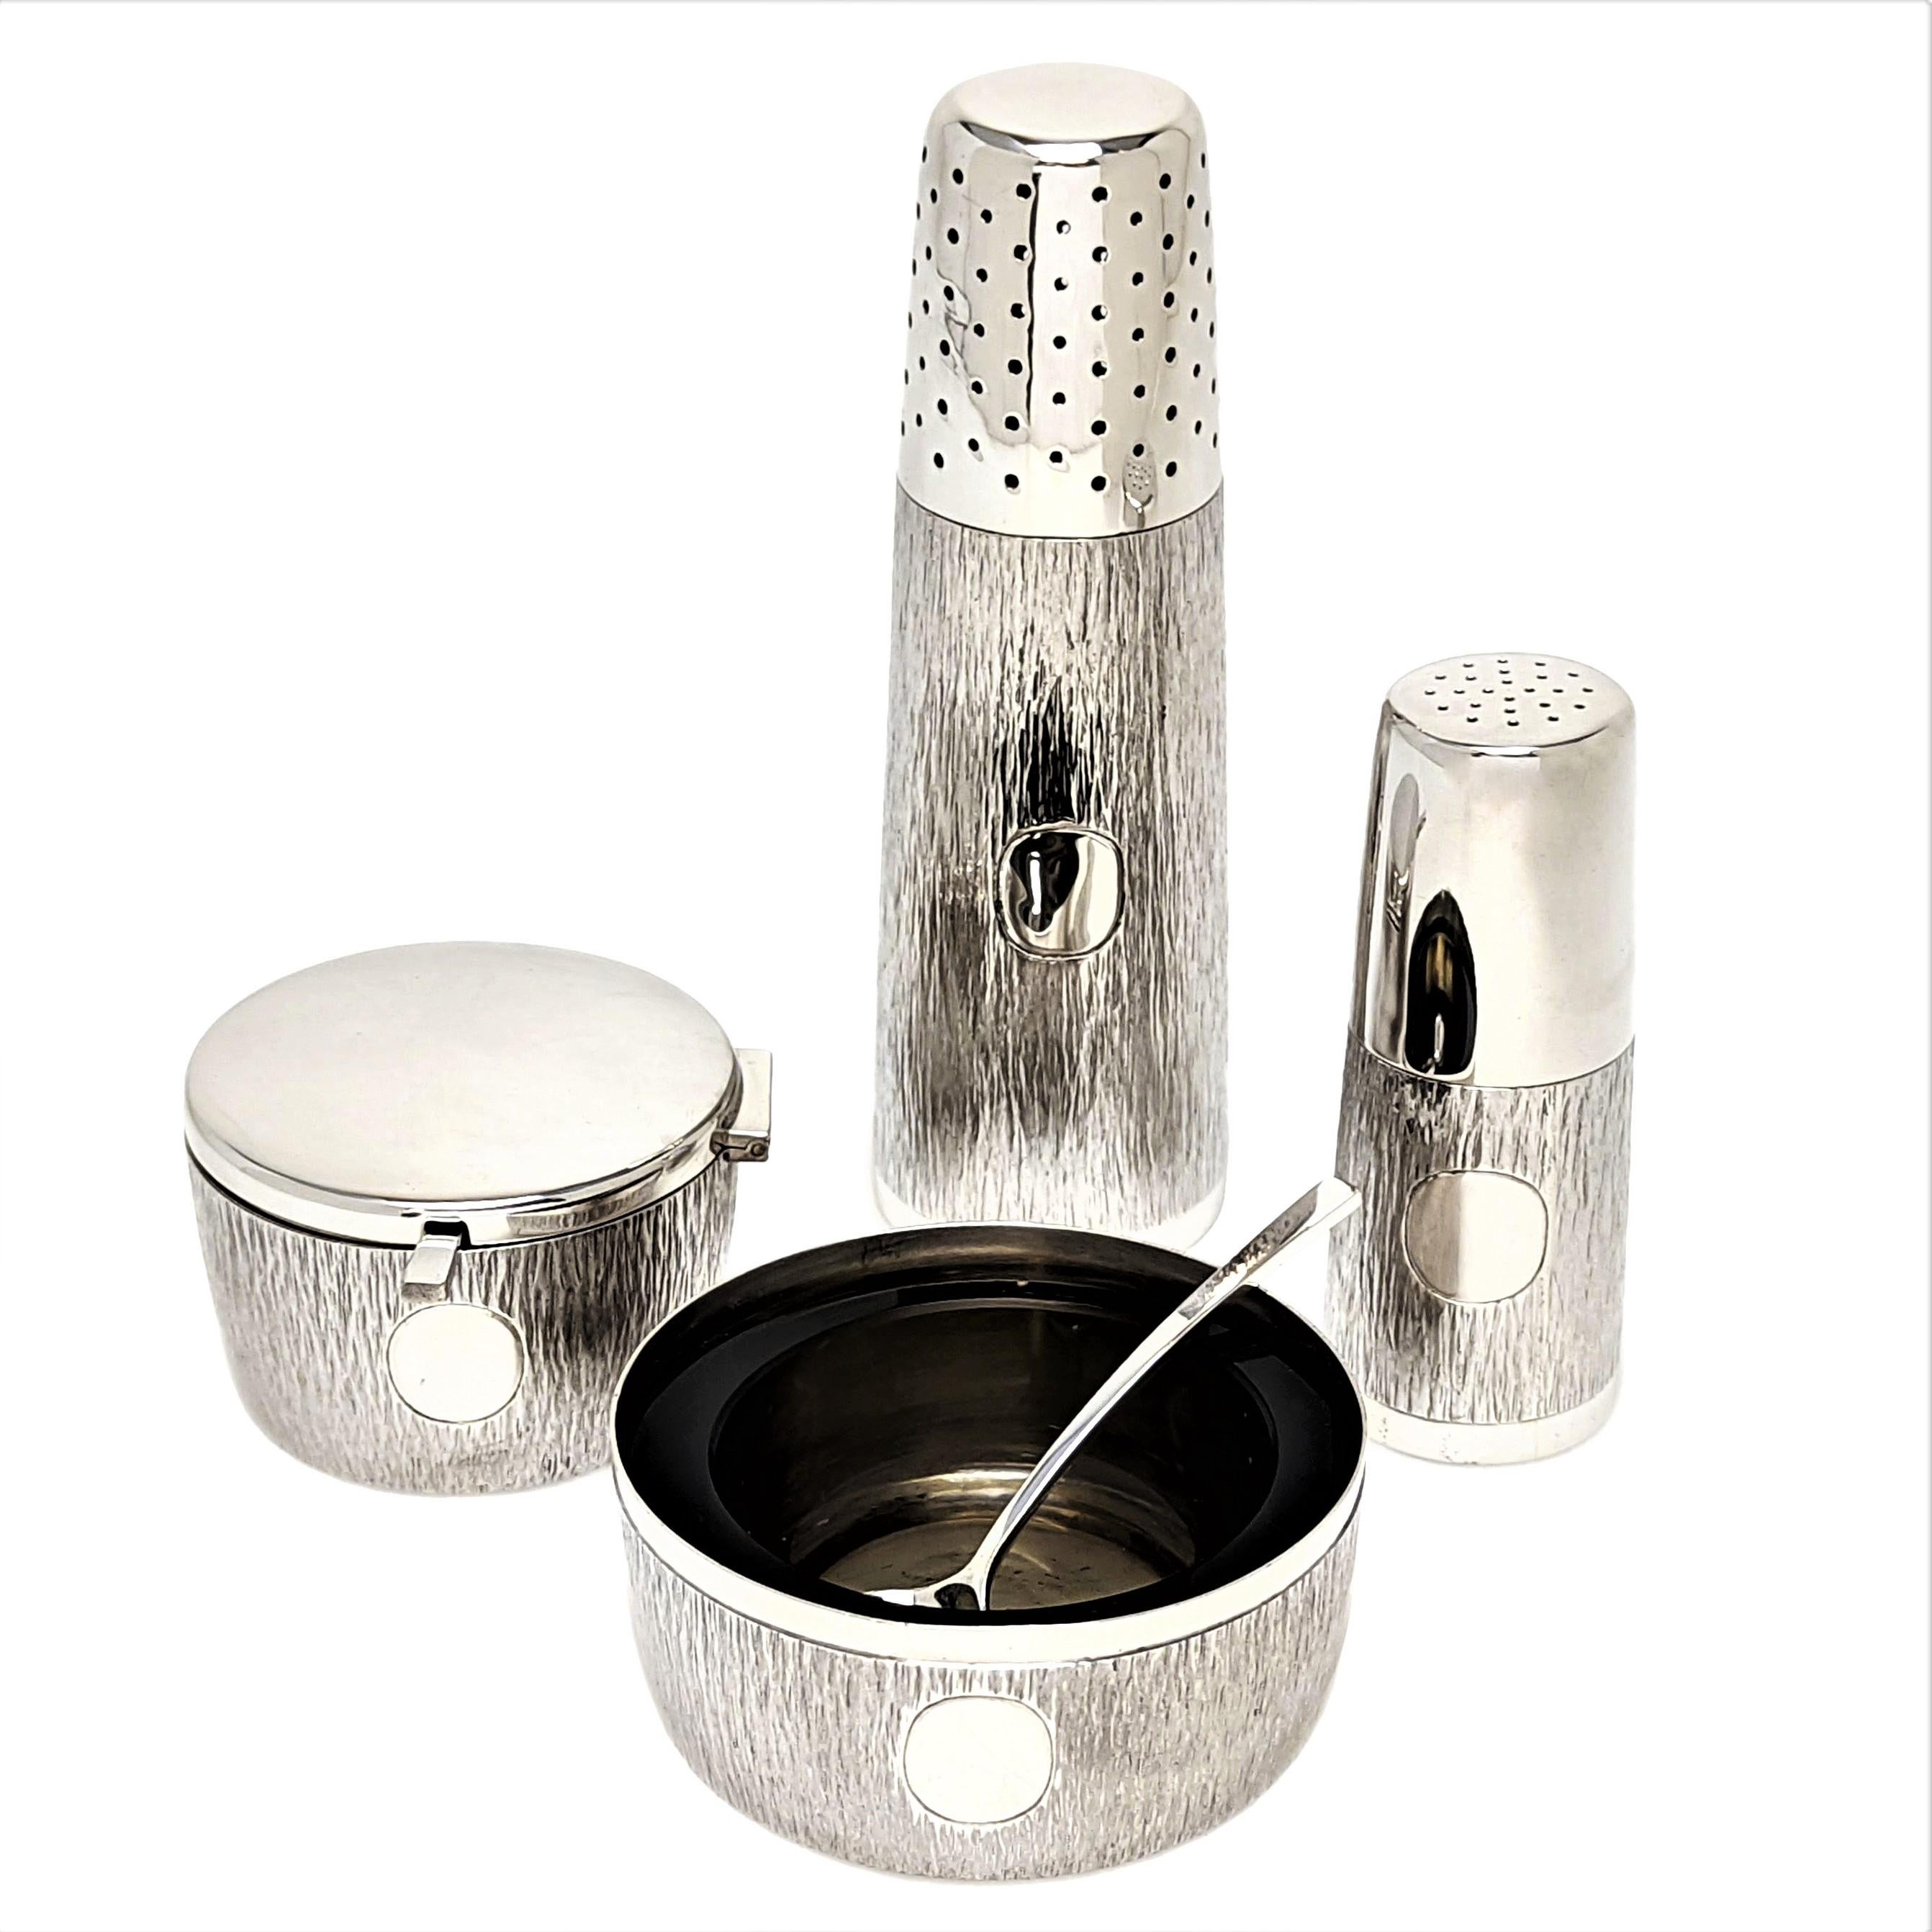 A modernist Gerald Benney Sterling Silver Condiment Set comprising of a Salt Pinch Pot, a Pepper Shaker, a Mustard Pot & a Caster. The Salt and Mustard have transparent brown glass liners and each has a silver spoon. The exterior of each item has an